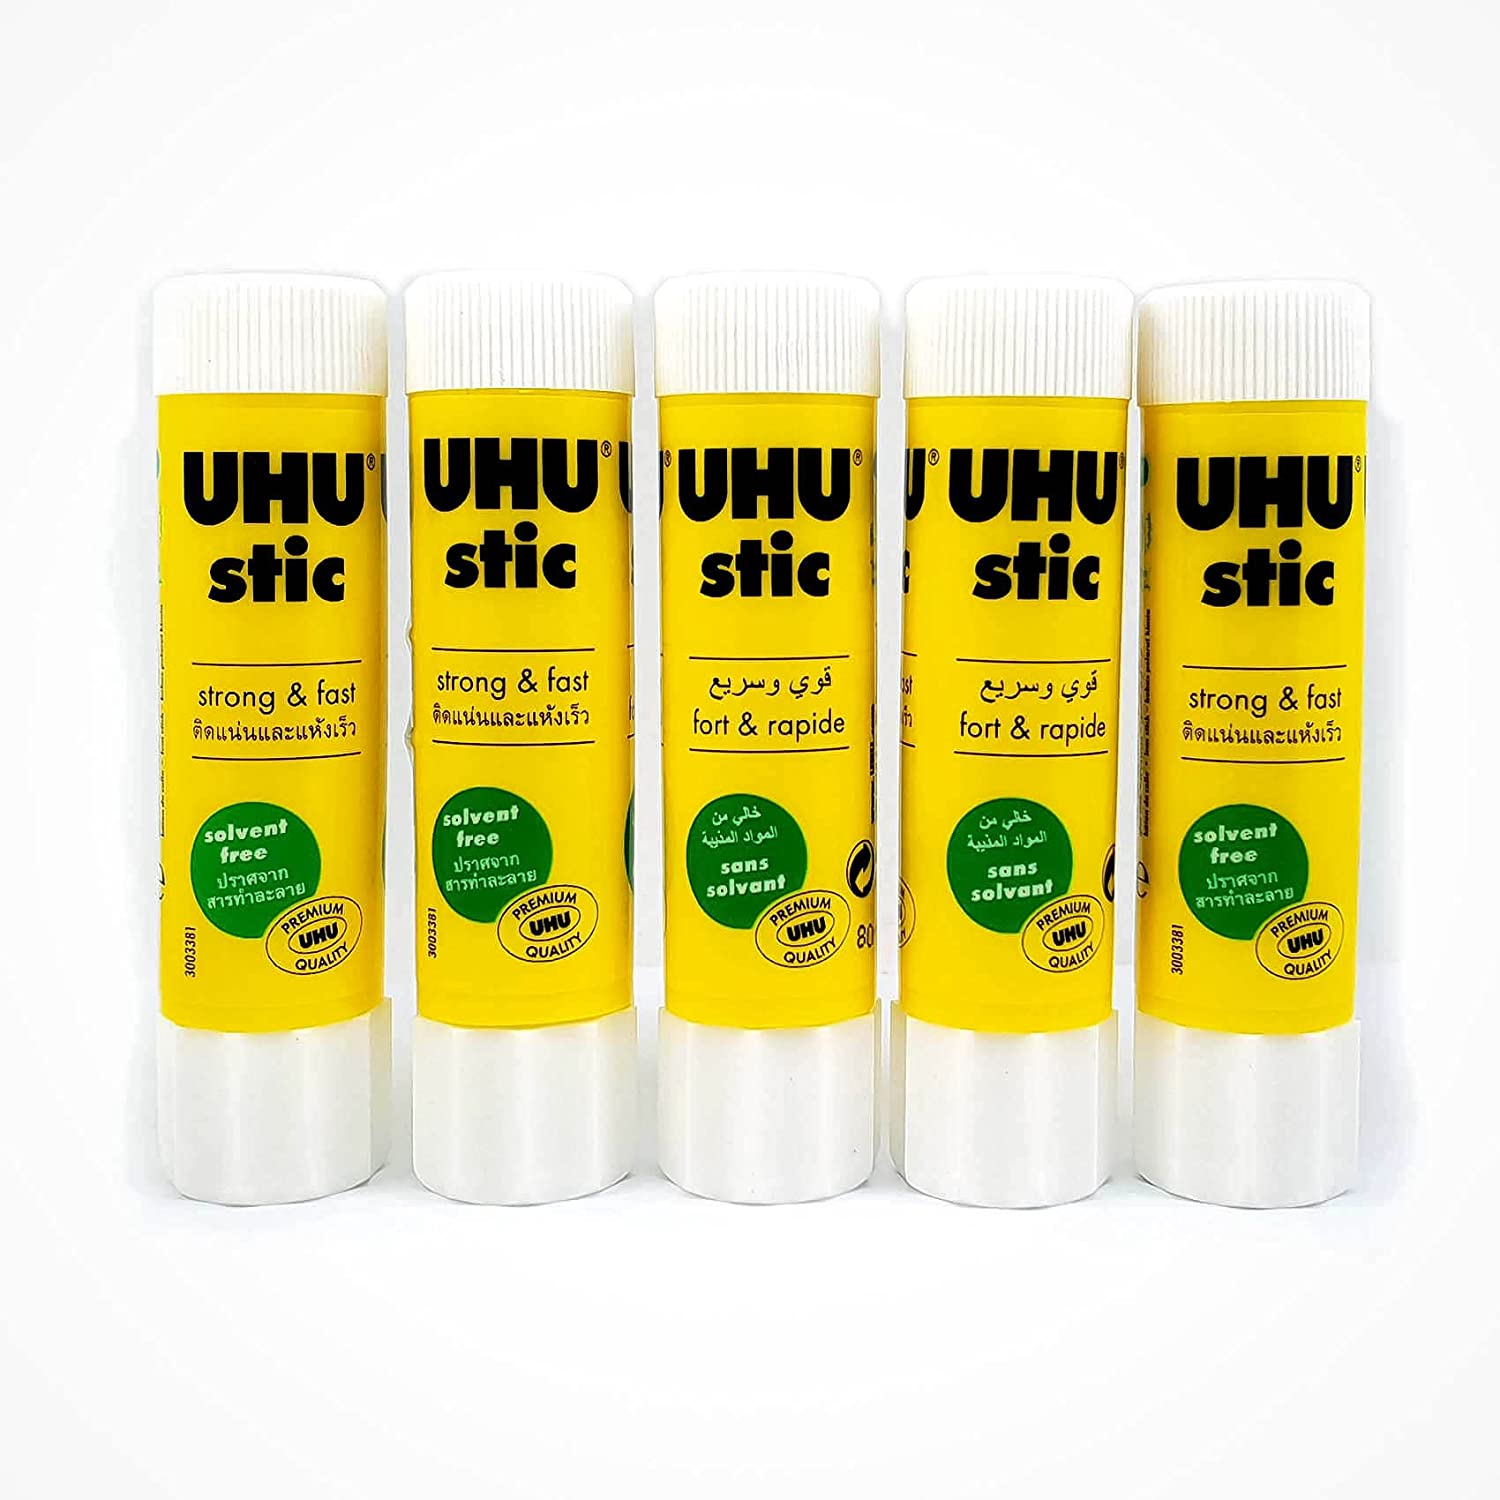 UHU STIC, The Proven Glue Stick - Glues strongly, quickly and permanently, without solvent, 8.2g, Set of 5, White